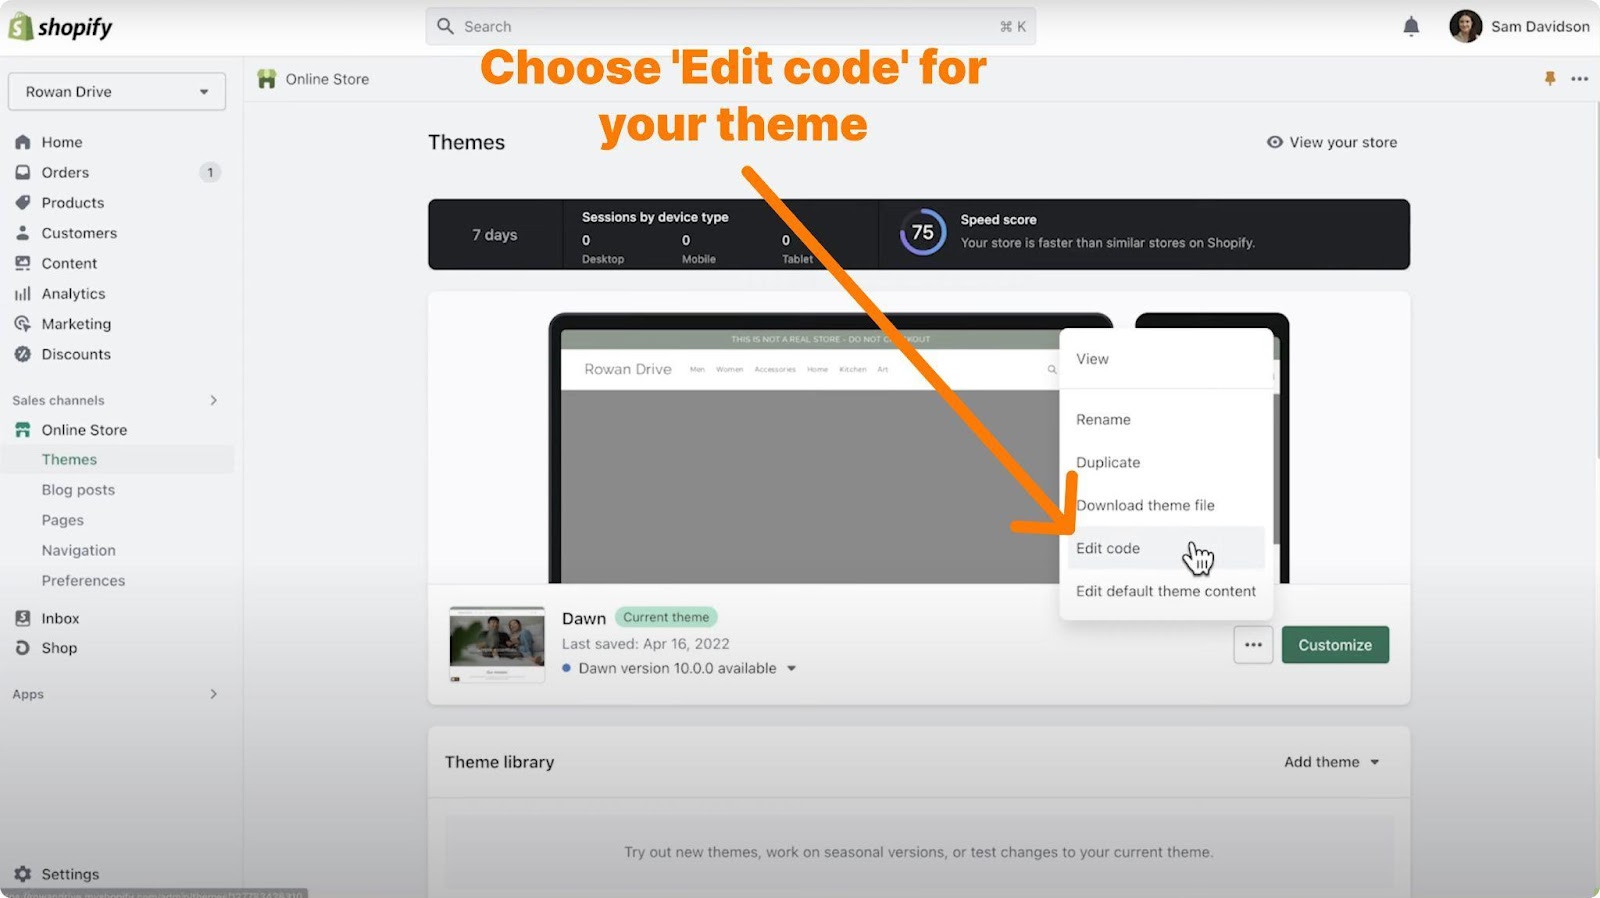 Choose “Edit code” for your theme.